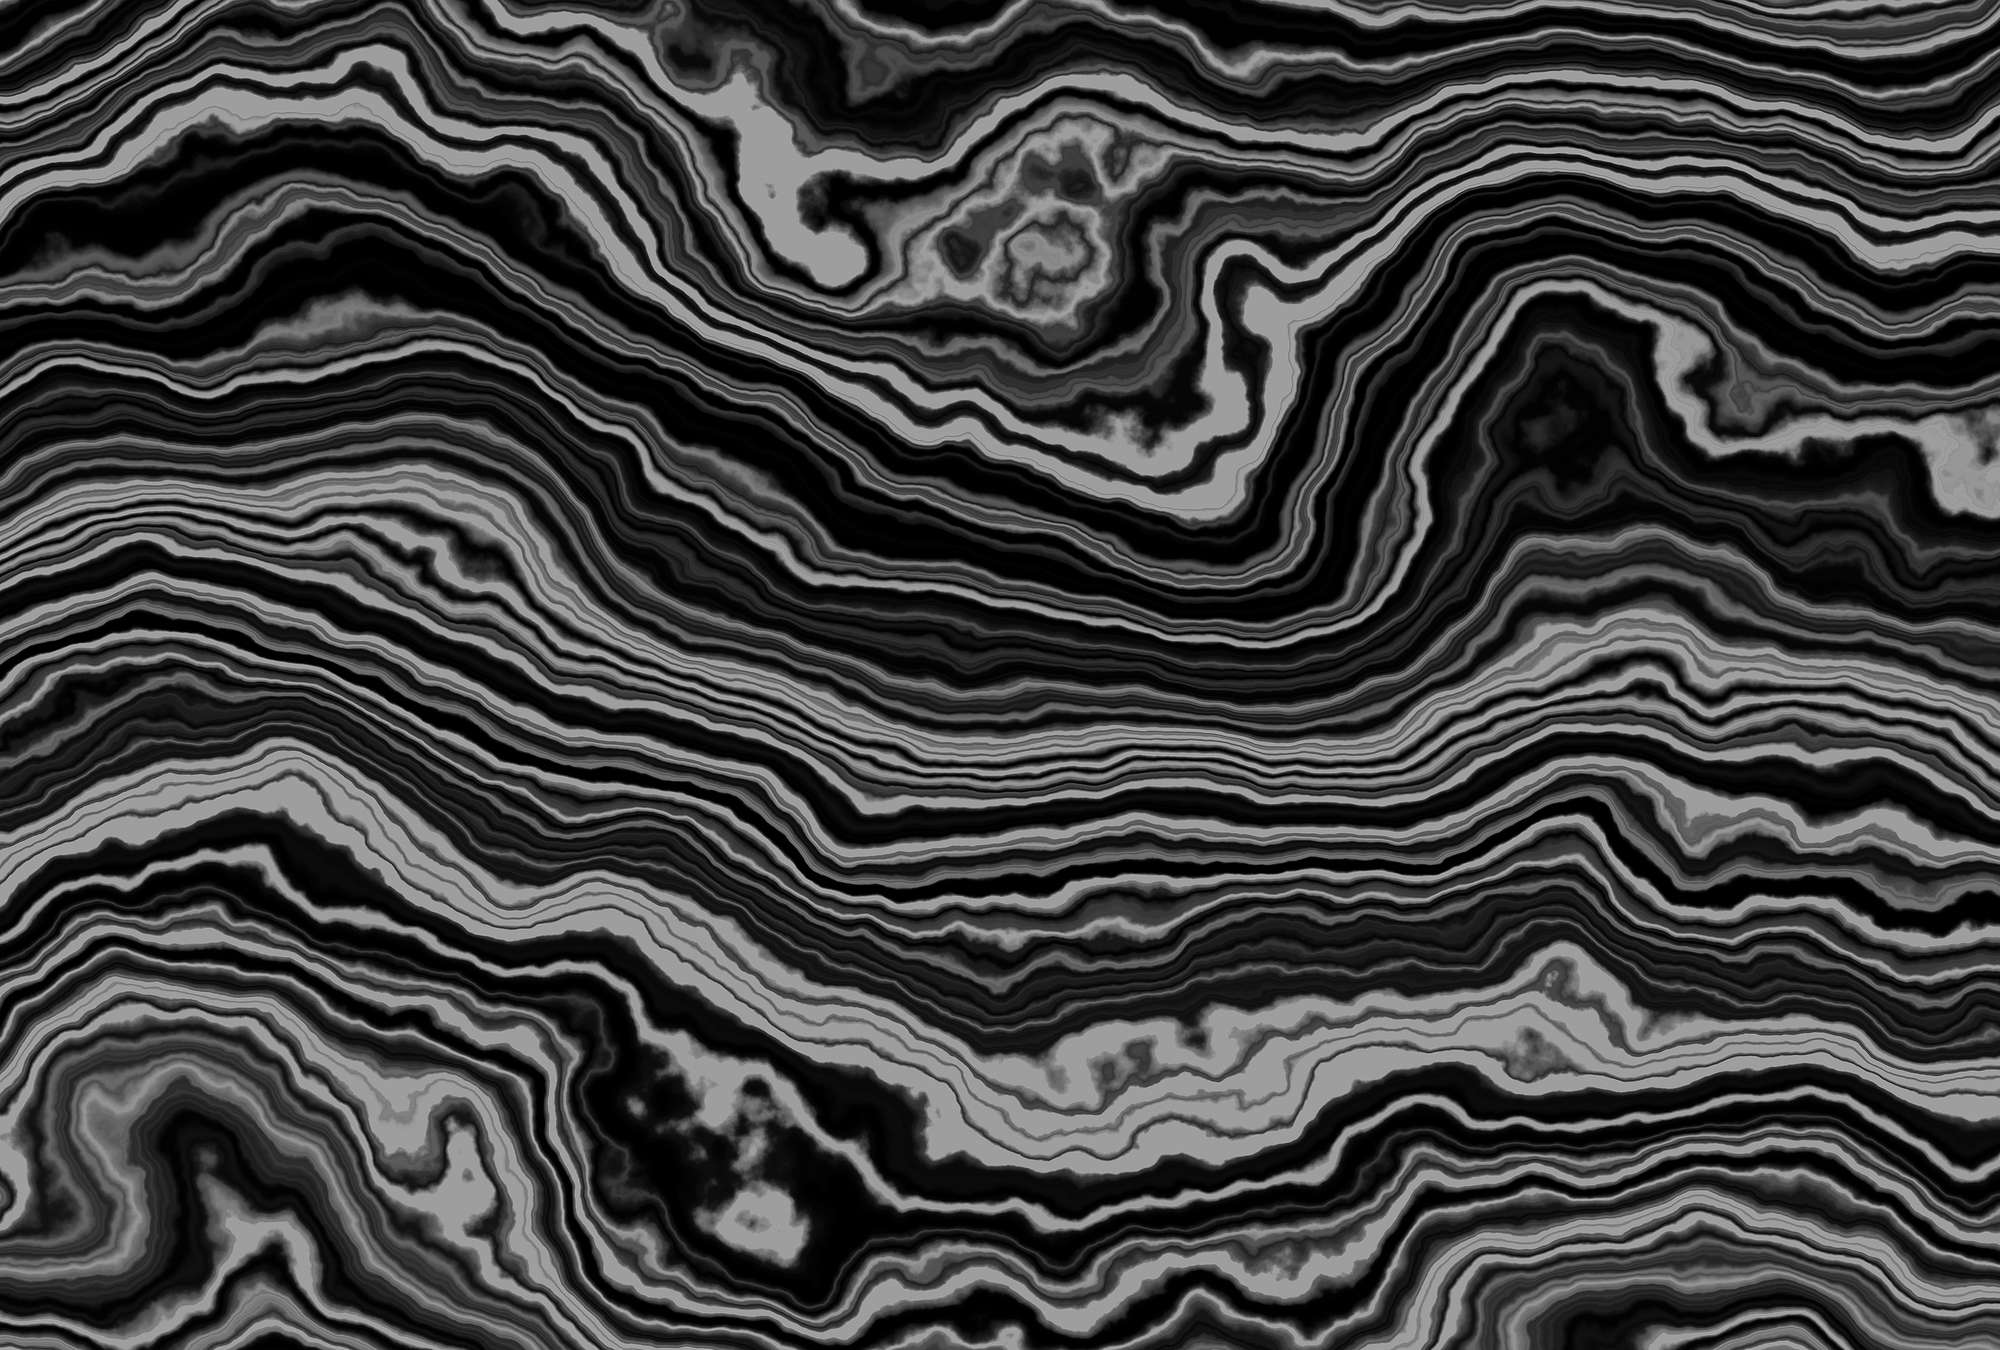             Onyx 1 - Cross section of an onyx marble as photo wallpaper - black, white | mother-of-pearl smooth fleece
        